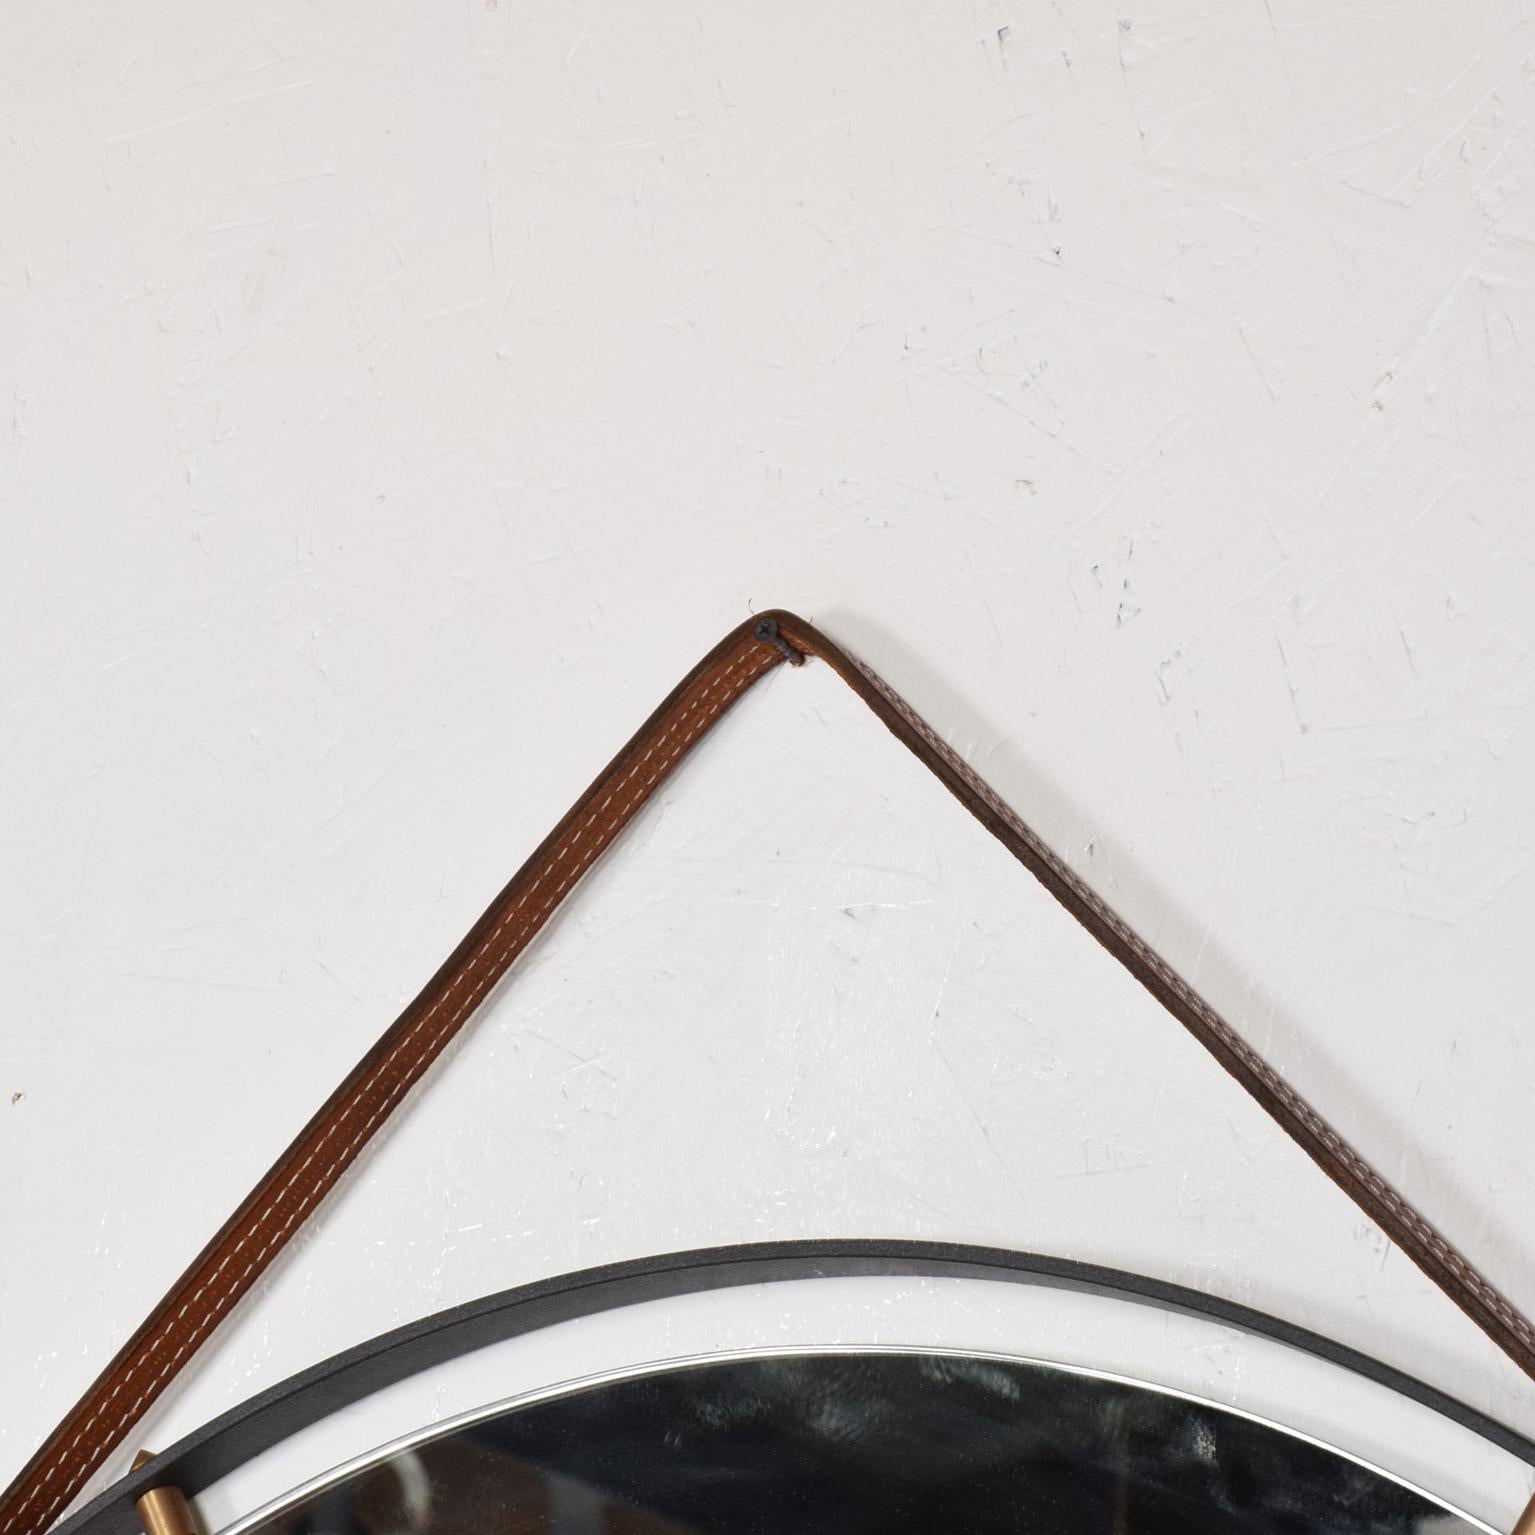 Contemporary Modernist Industrial Wall Mirror Pablex with Leather Straps